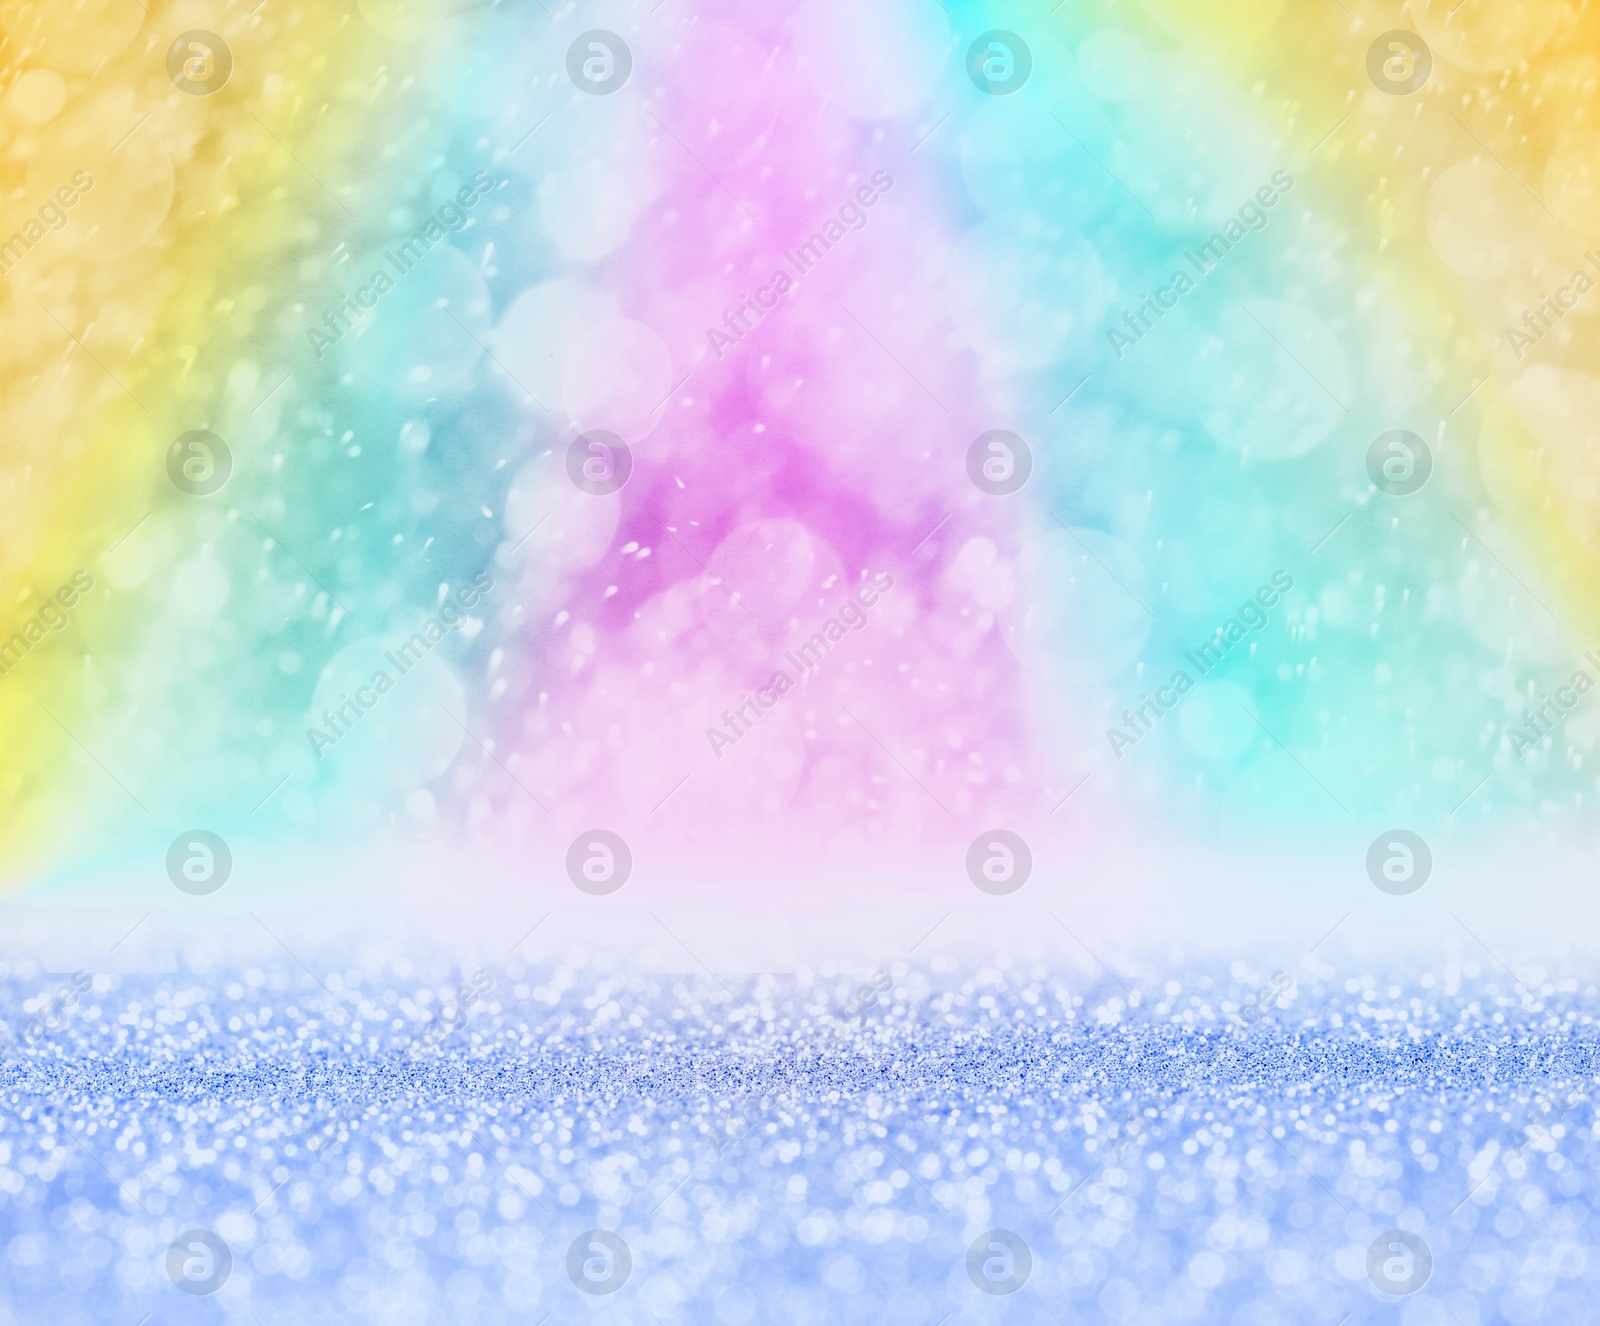 Image of Bright background with sparkling glitter and bokeh effect, closeup. Backdrop for party invitations or holiday cards